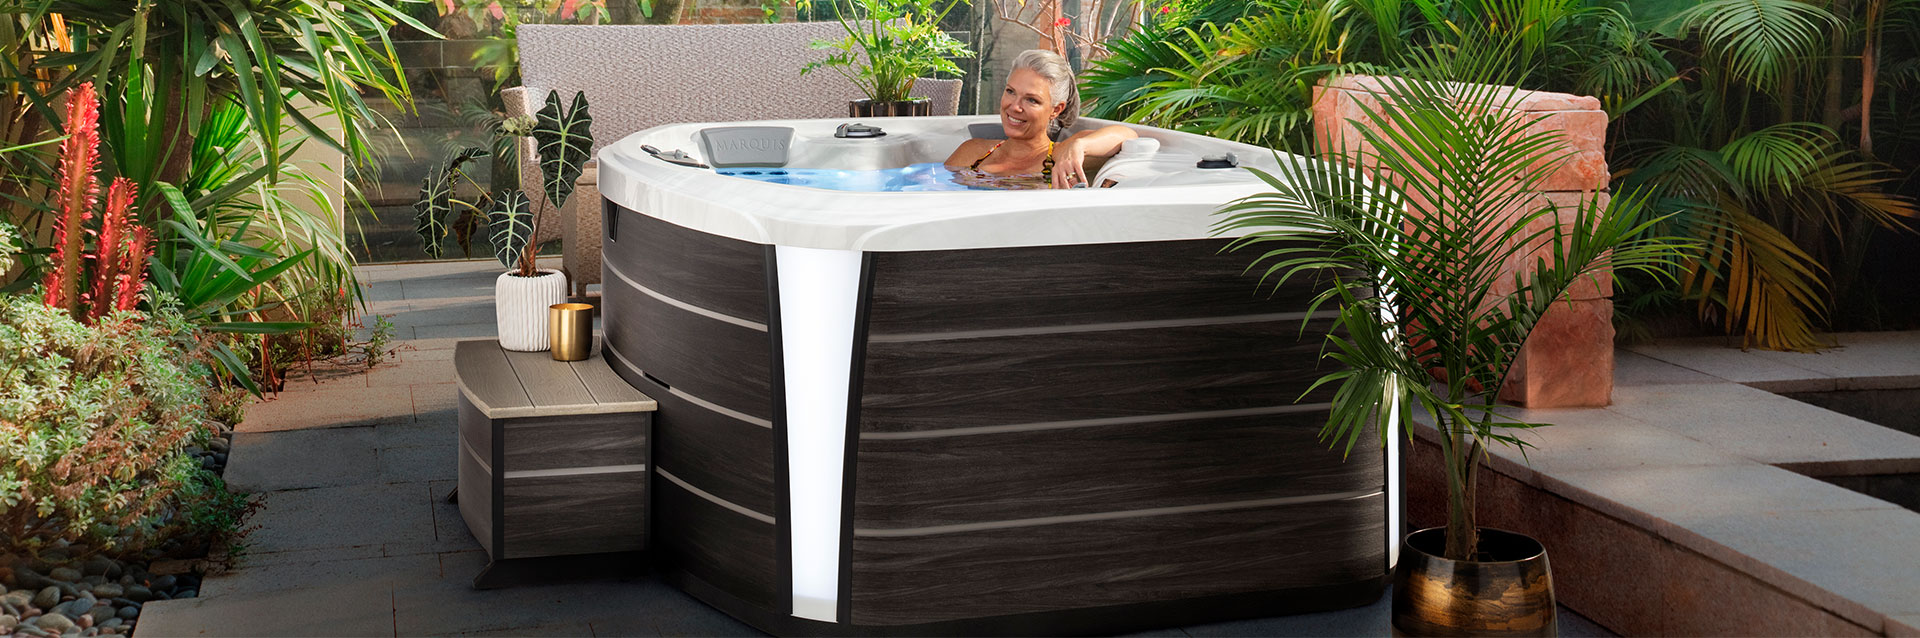 beauty image showing 3 person hot tubs